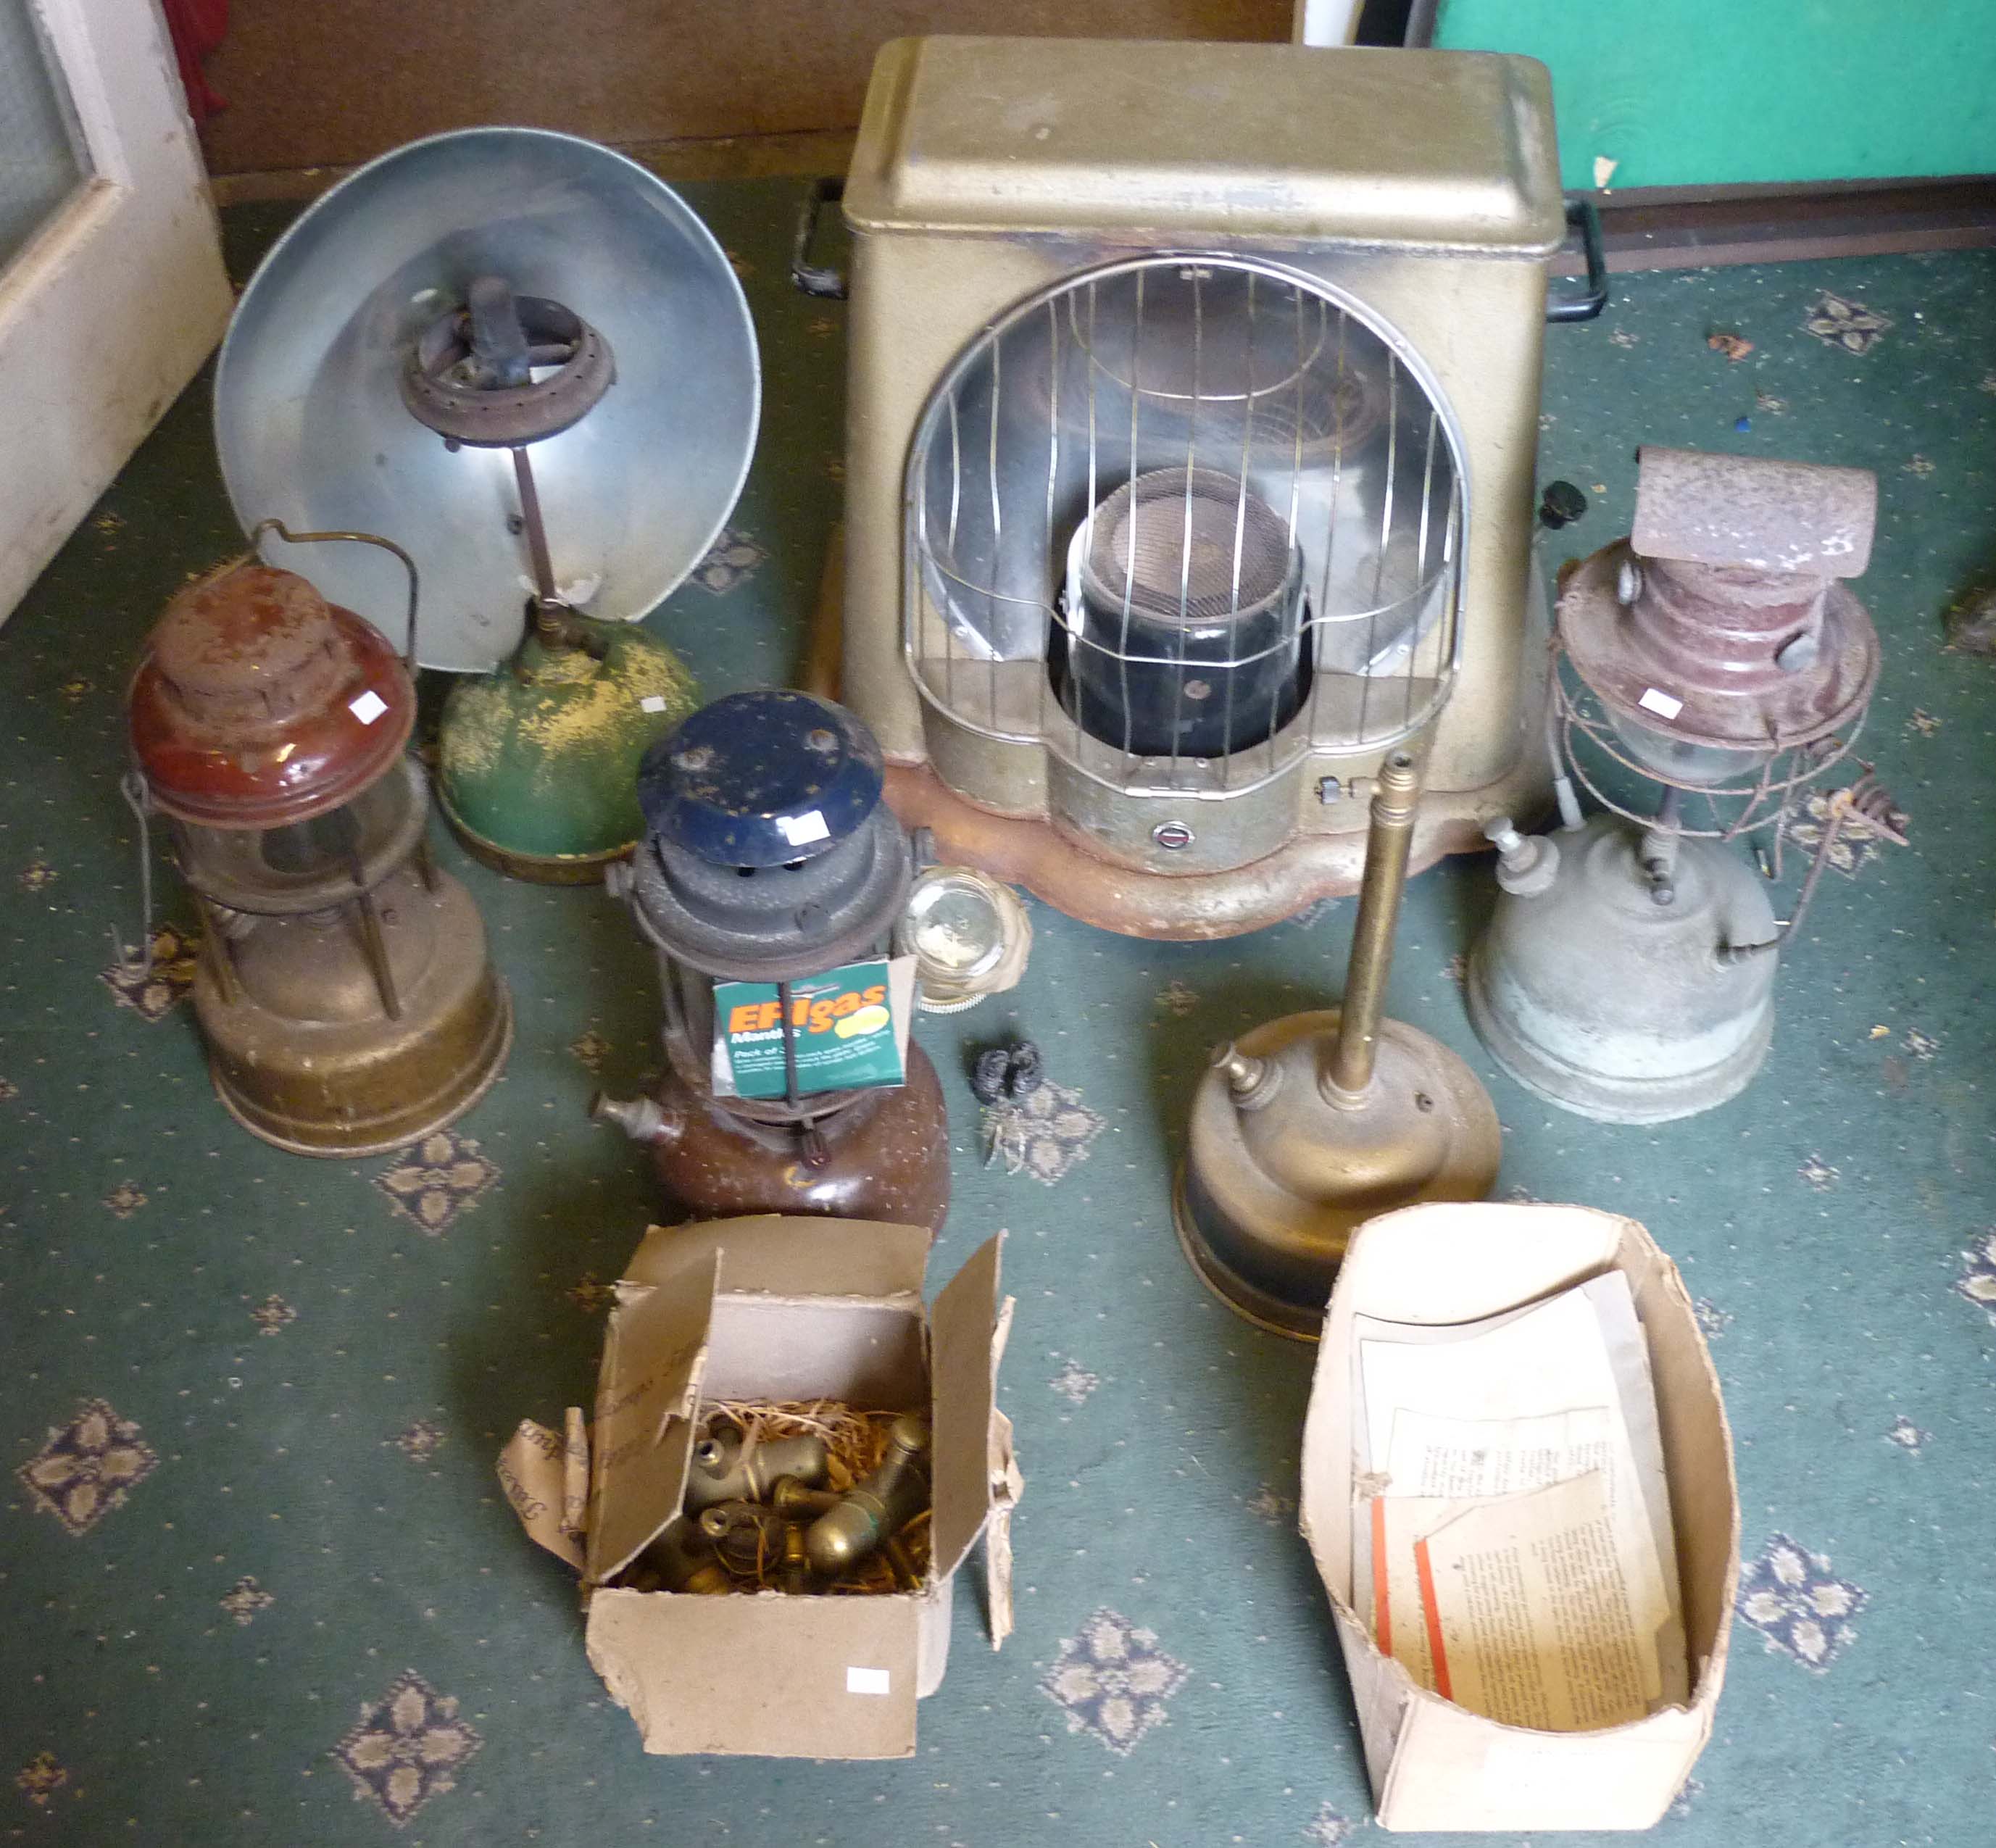 Five vintage parafin lamps, floor heater and accessories